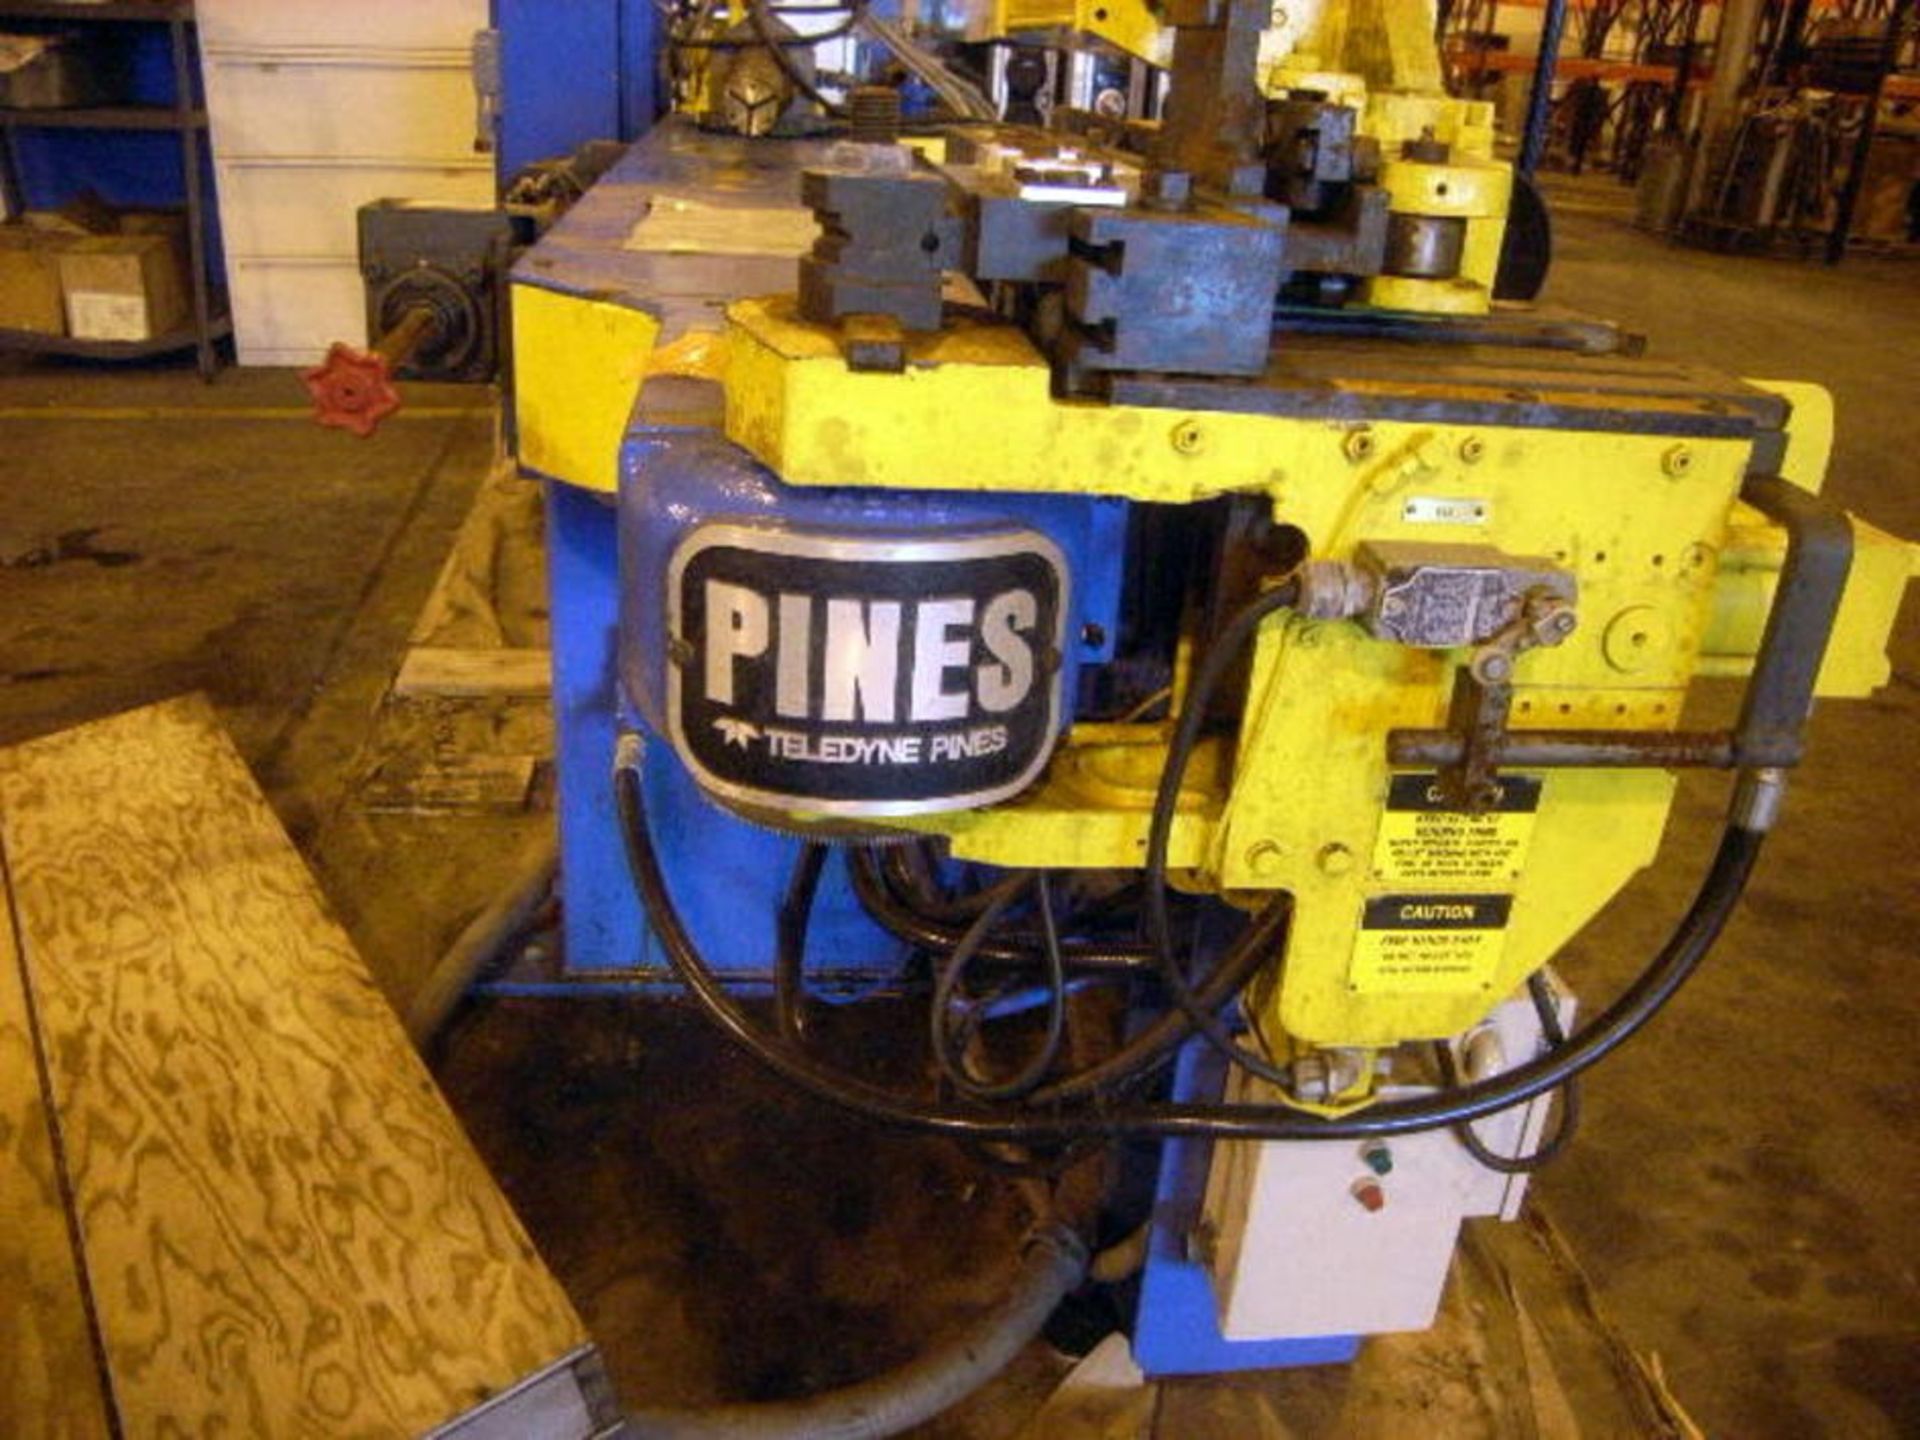 Pines Horizontal Hydraulic Tube Bender, 1 1/2" x 0.188", Mdl: #1 - Painesville, OH - 7116P - Image 7 of 35